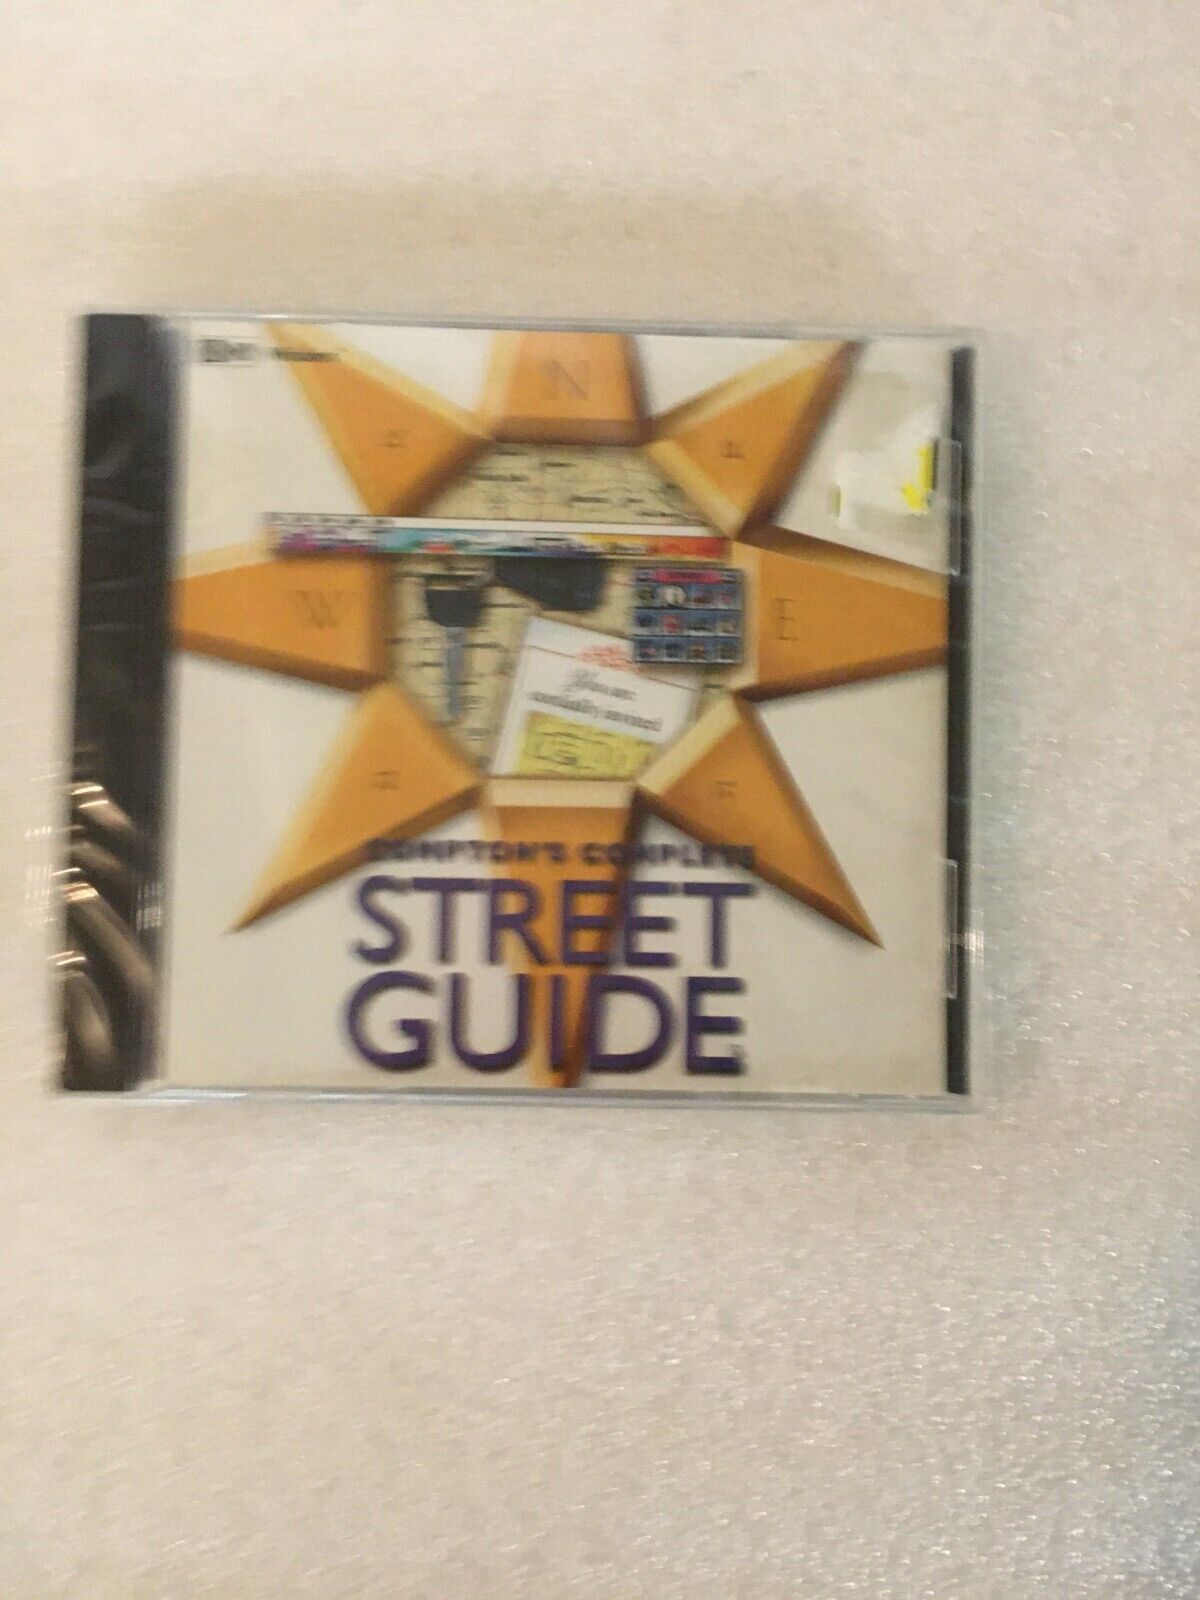 COMPTON\'S COMPLETE STREET GUIDE FOR WINDOWS CD 1995 SEALED